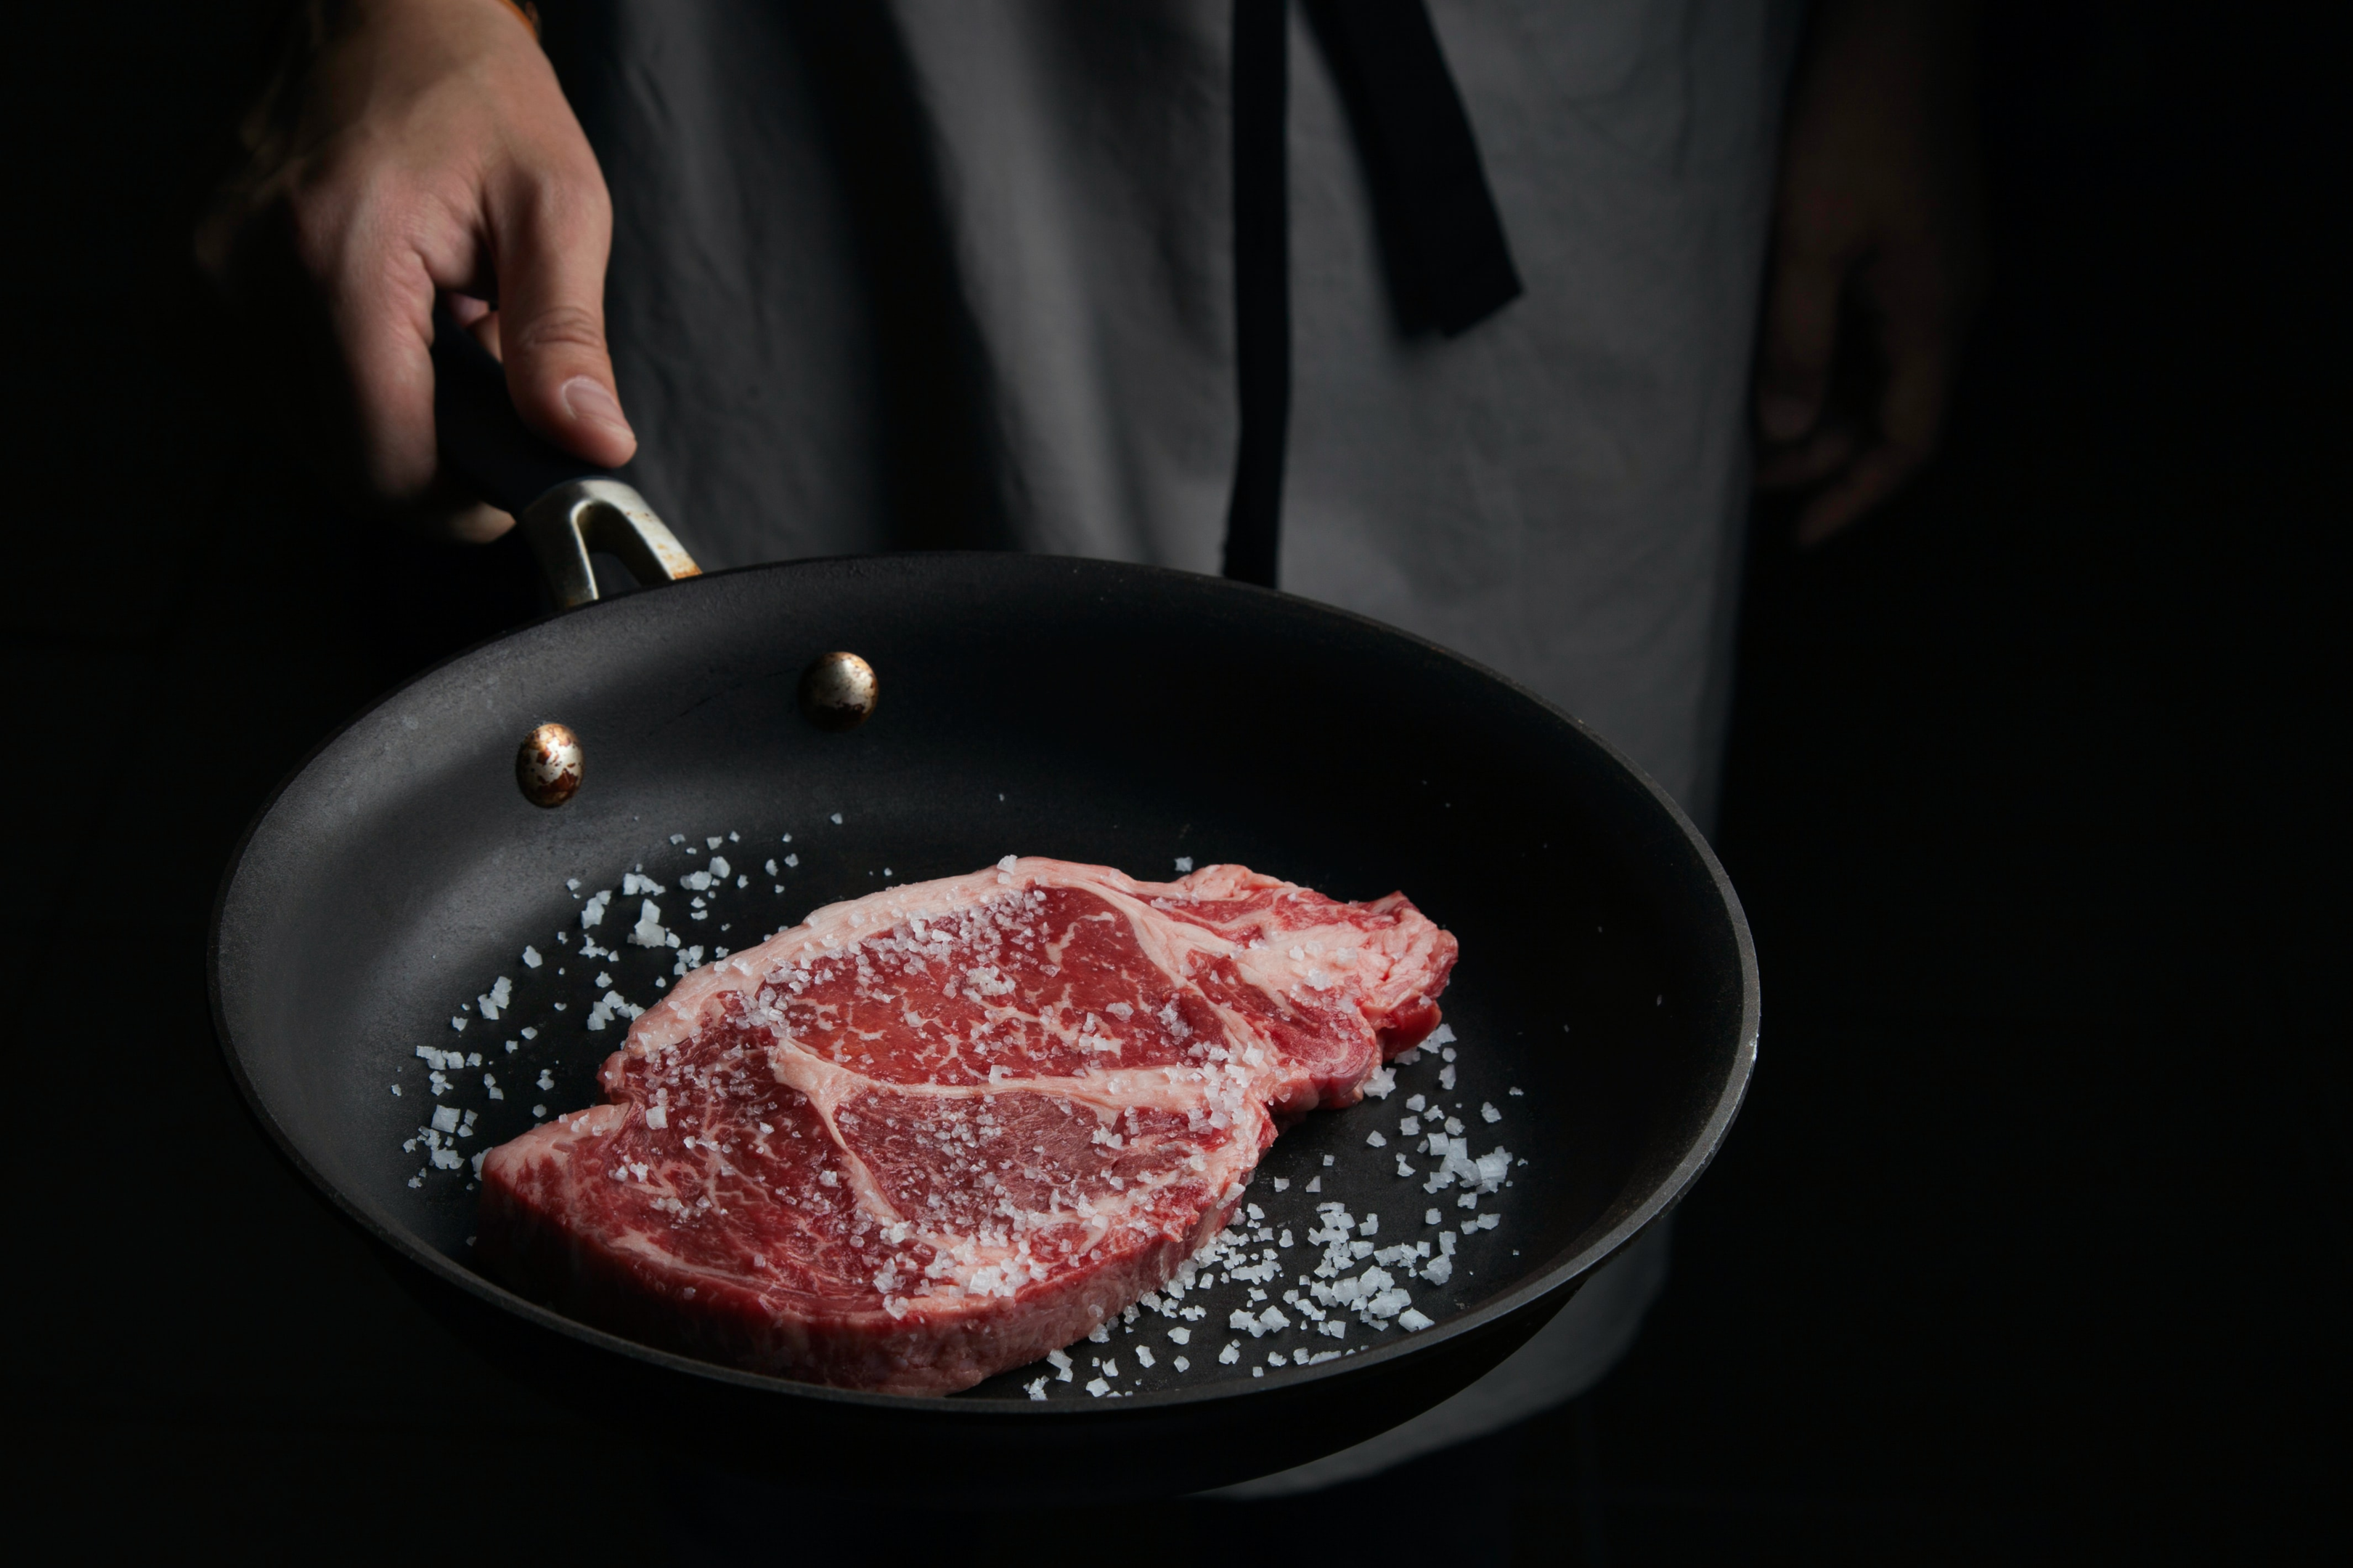 Pan-frying steak results in distinctive, delicious flavours